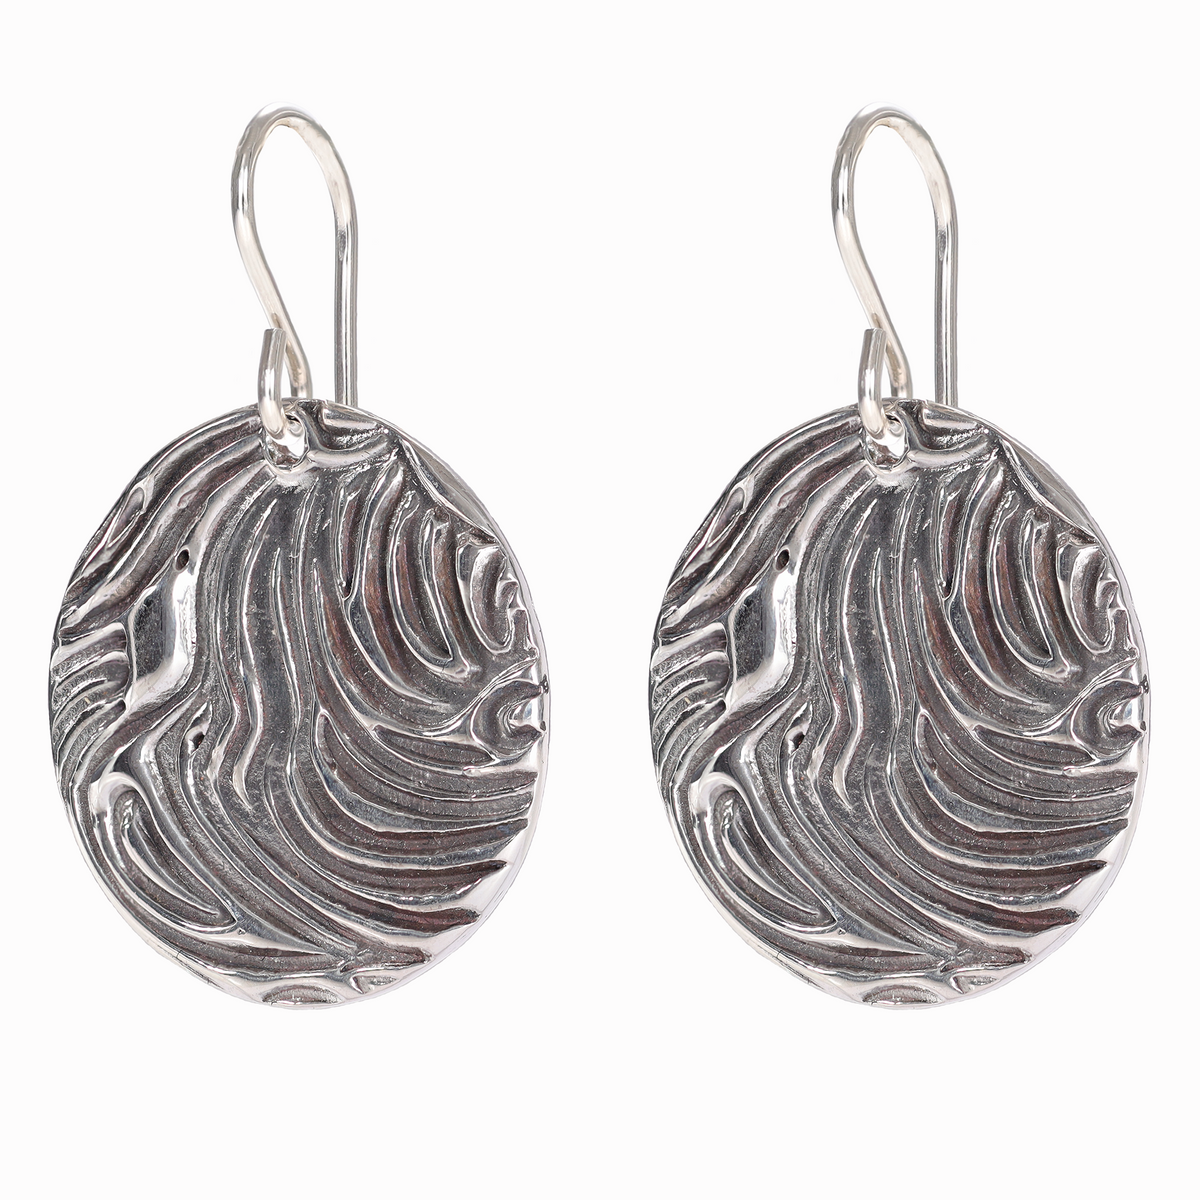 Wind Textured Large Sterling Silver Earrings on Short Ear Wires